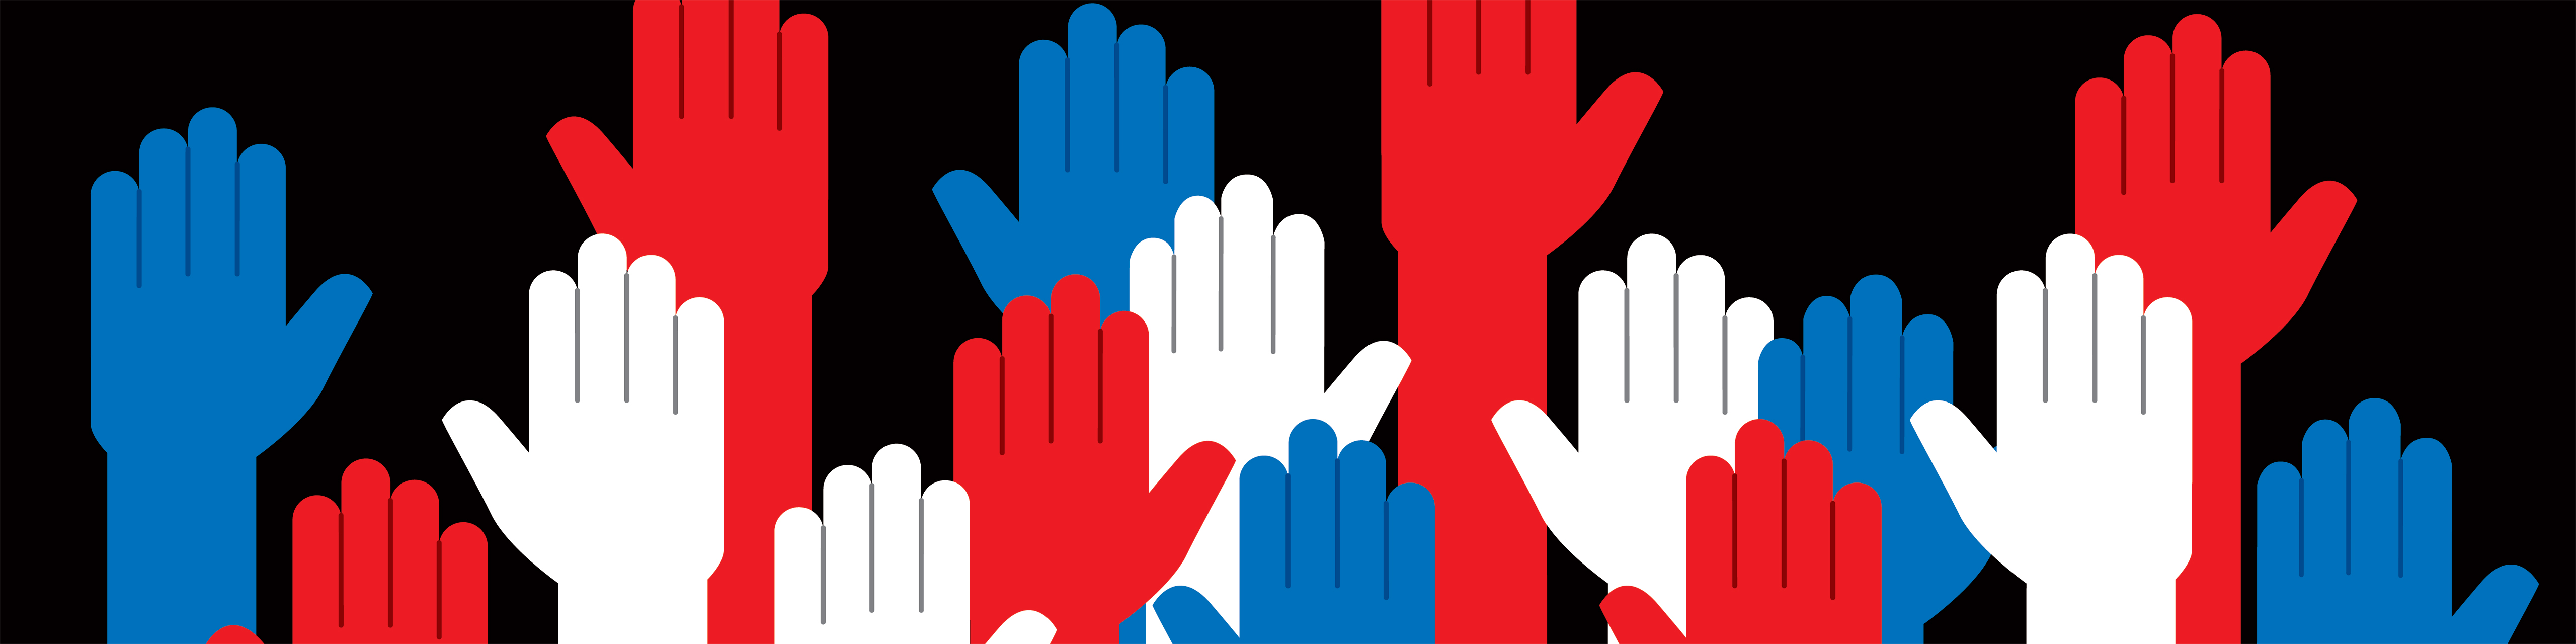 stock illustration of Hands Red White and Blue Raised